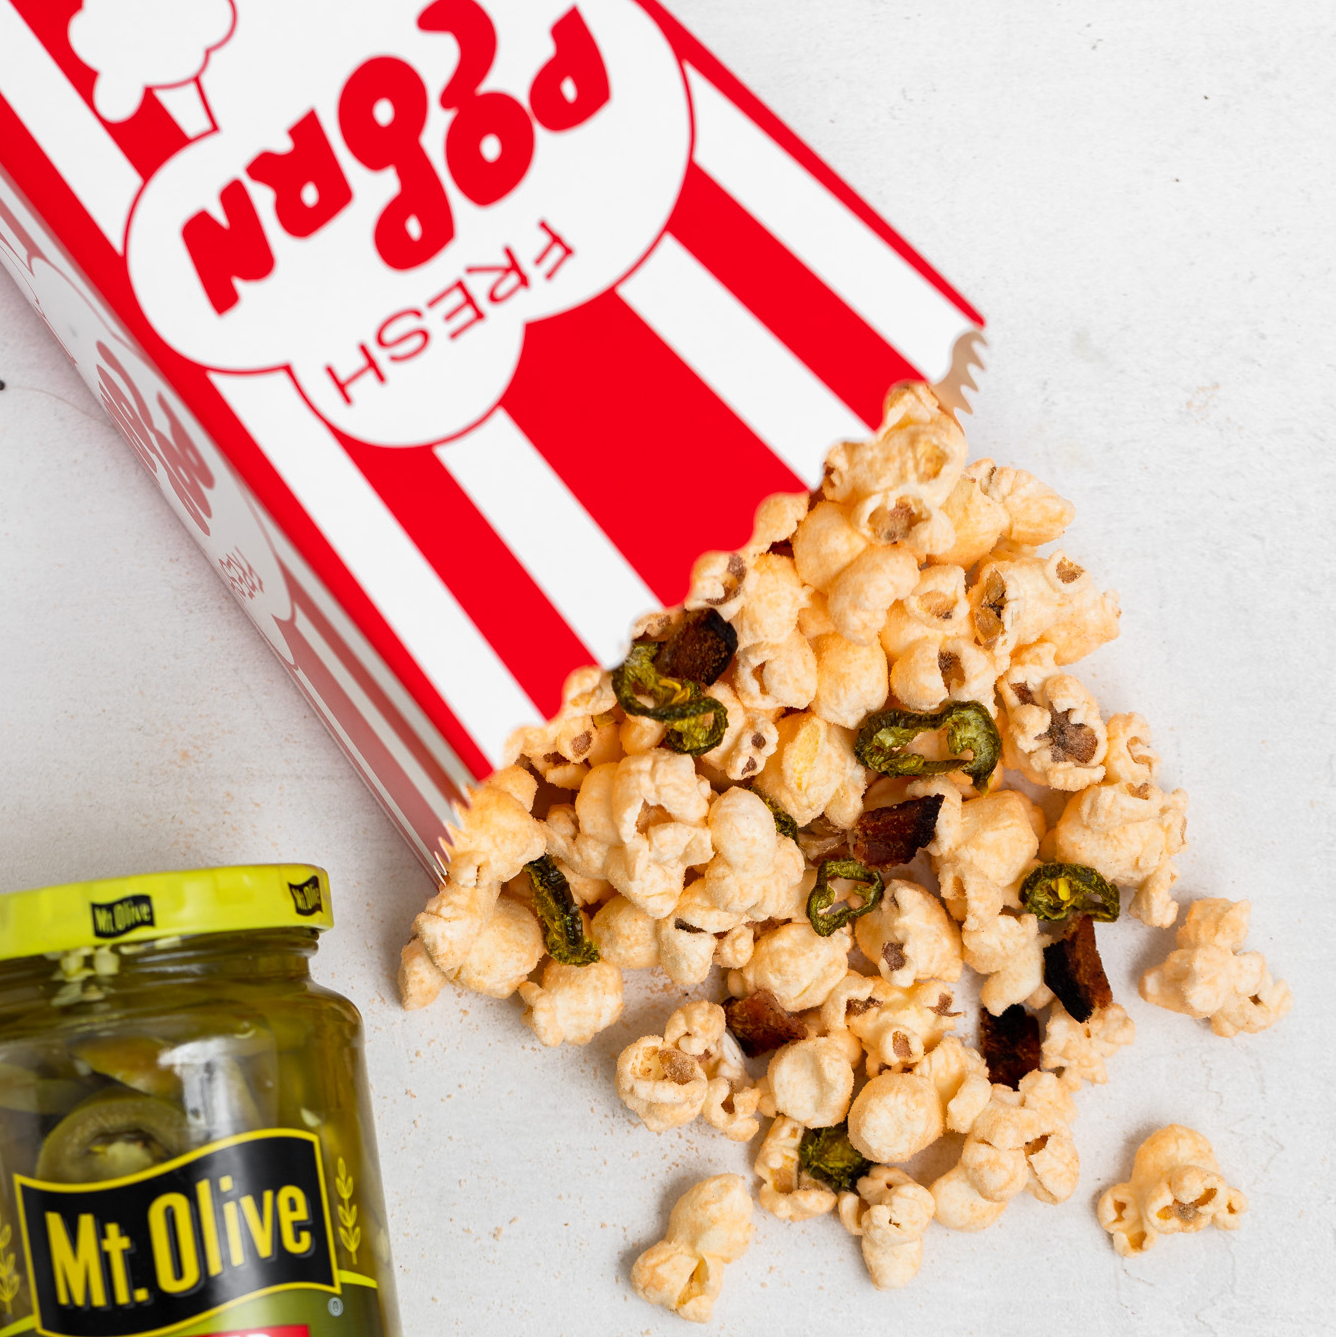 red and white striped popcorn box with popcorn spilling out onto white countertop. popcorn has jalapenos and bacon in it. jar of jalapenos beside it